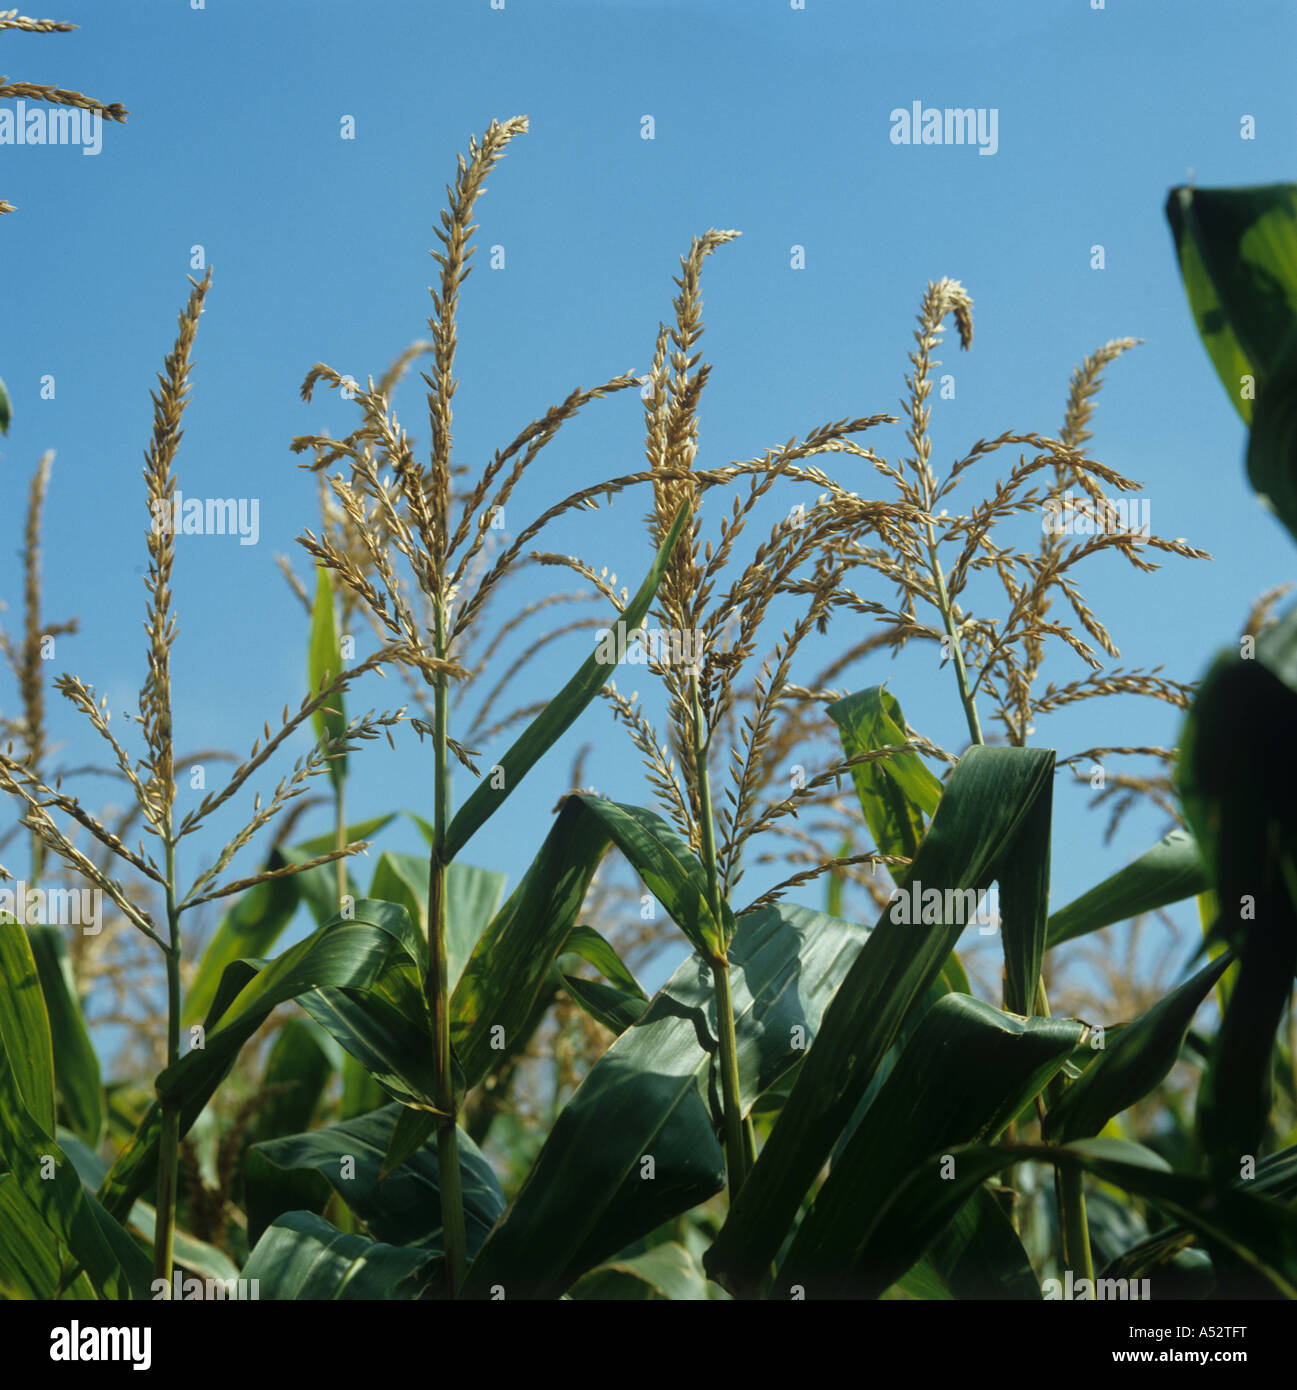 Male tassels flowers on maturing maize Zea mays crop Stock Photo